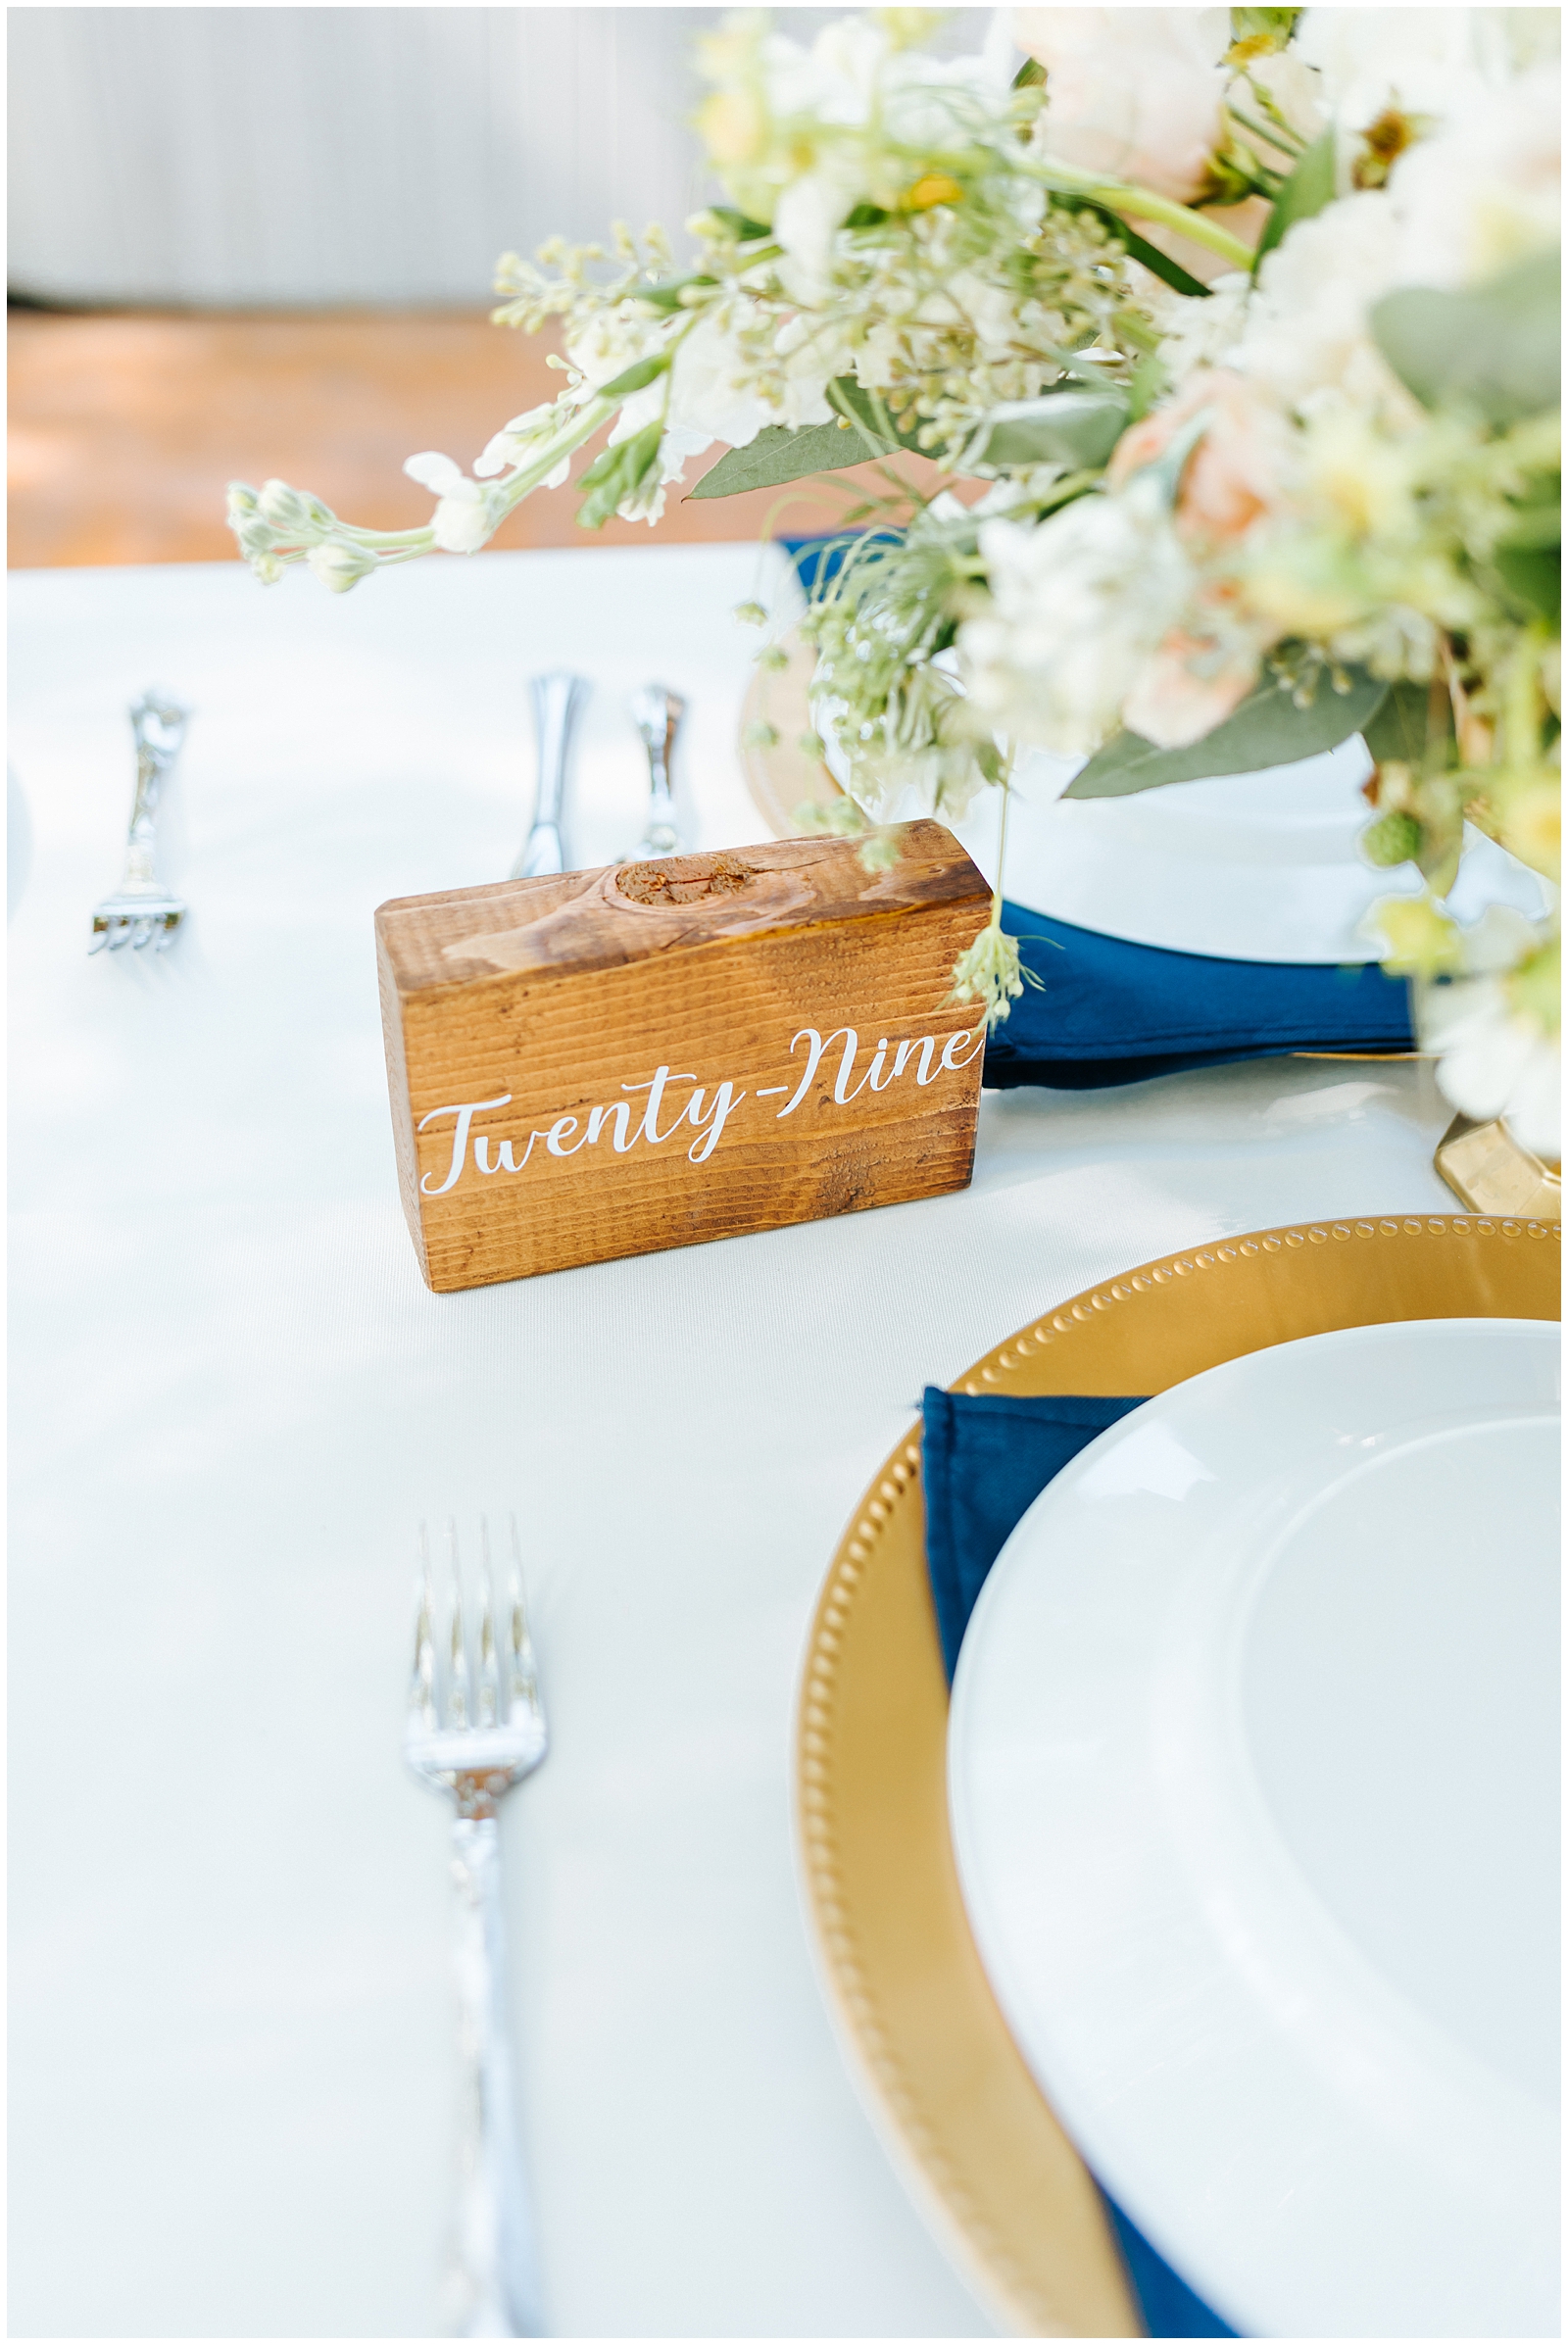 Table Place Setting Table Numbers on Wood Block with Acrylic and Gold Chargers